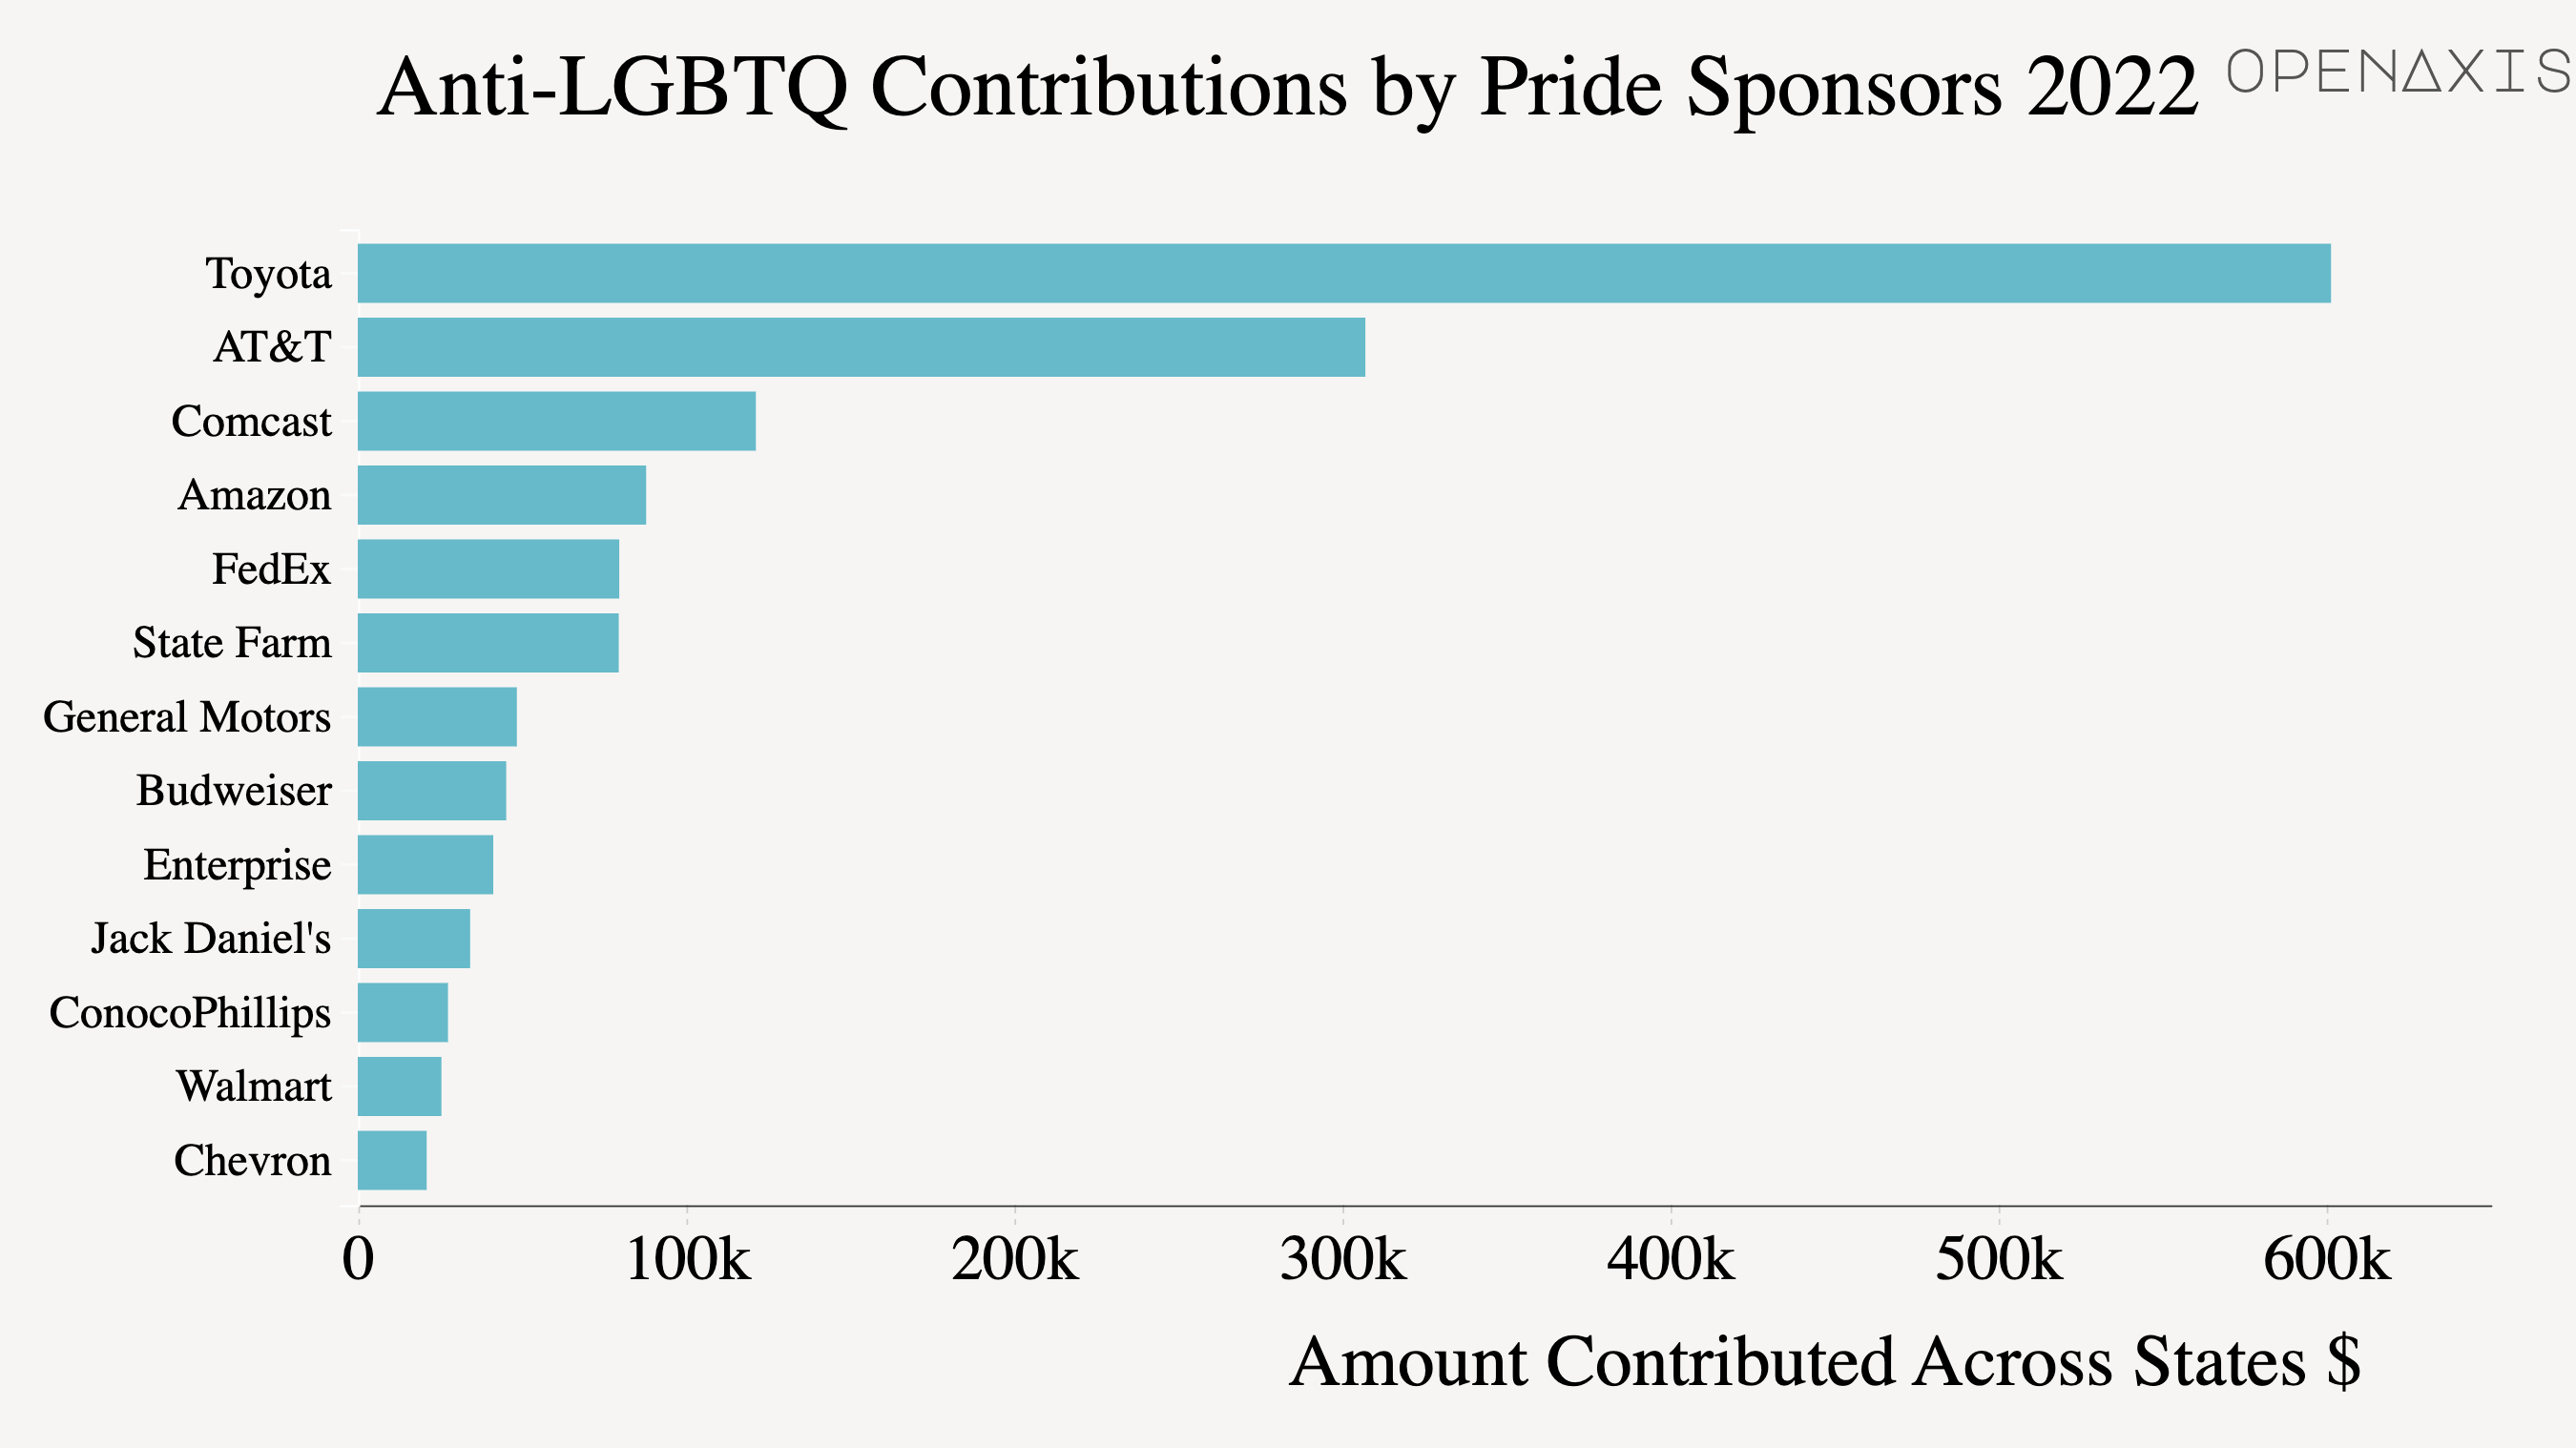 <p>﻿Pride sponsors who are also contributing to politicians supporting anti-lgbtq policies; another term for this type of corporate grandstanding is called "pinkwashing."</p><p><br /></p><p><a href="/search?q=%23pridemonth" target="_blank">#pridemonth</a>﻿ <span data-index="0" data-denotation-char data-id="0" data-value="&lt;a href=&quot;/search?q=%23pinkwashing&quot; target=_self&gt;#pinkwashing" data-link="/search?q=%23pinkwashing">﻿<span contenteditable="false"><span></span><a href="/search?q=%23pinkwashing" target="_self">#pinkwashing</a></span>﻿</span> </p><p><br /></p><p>Source: <a href="/data/3817" target="_blank">Data for Progress</a></p>